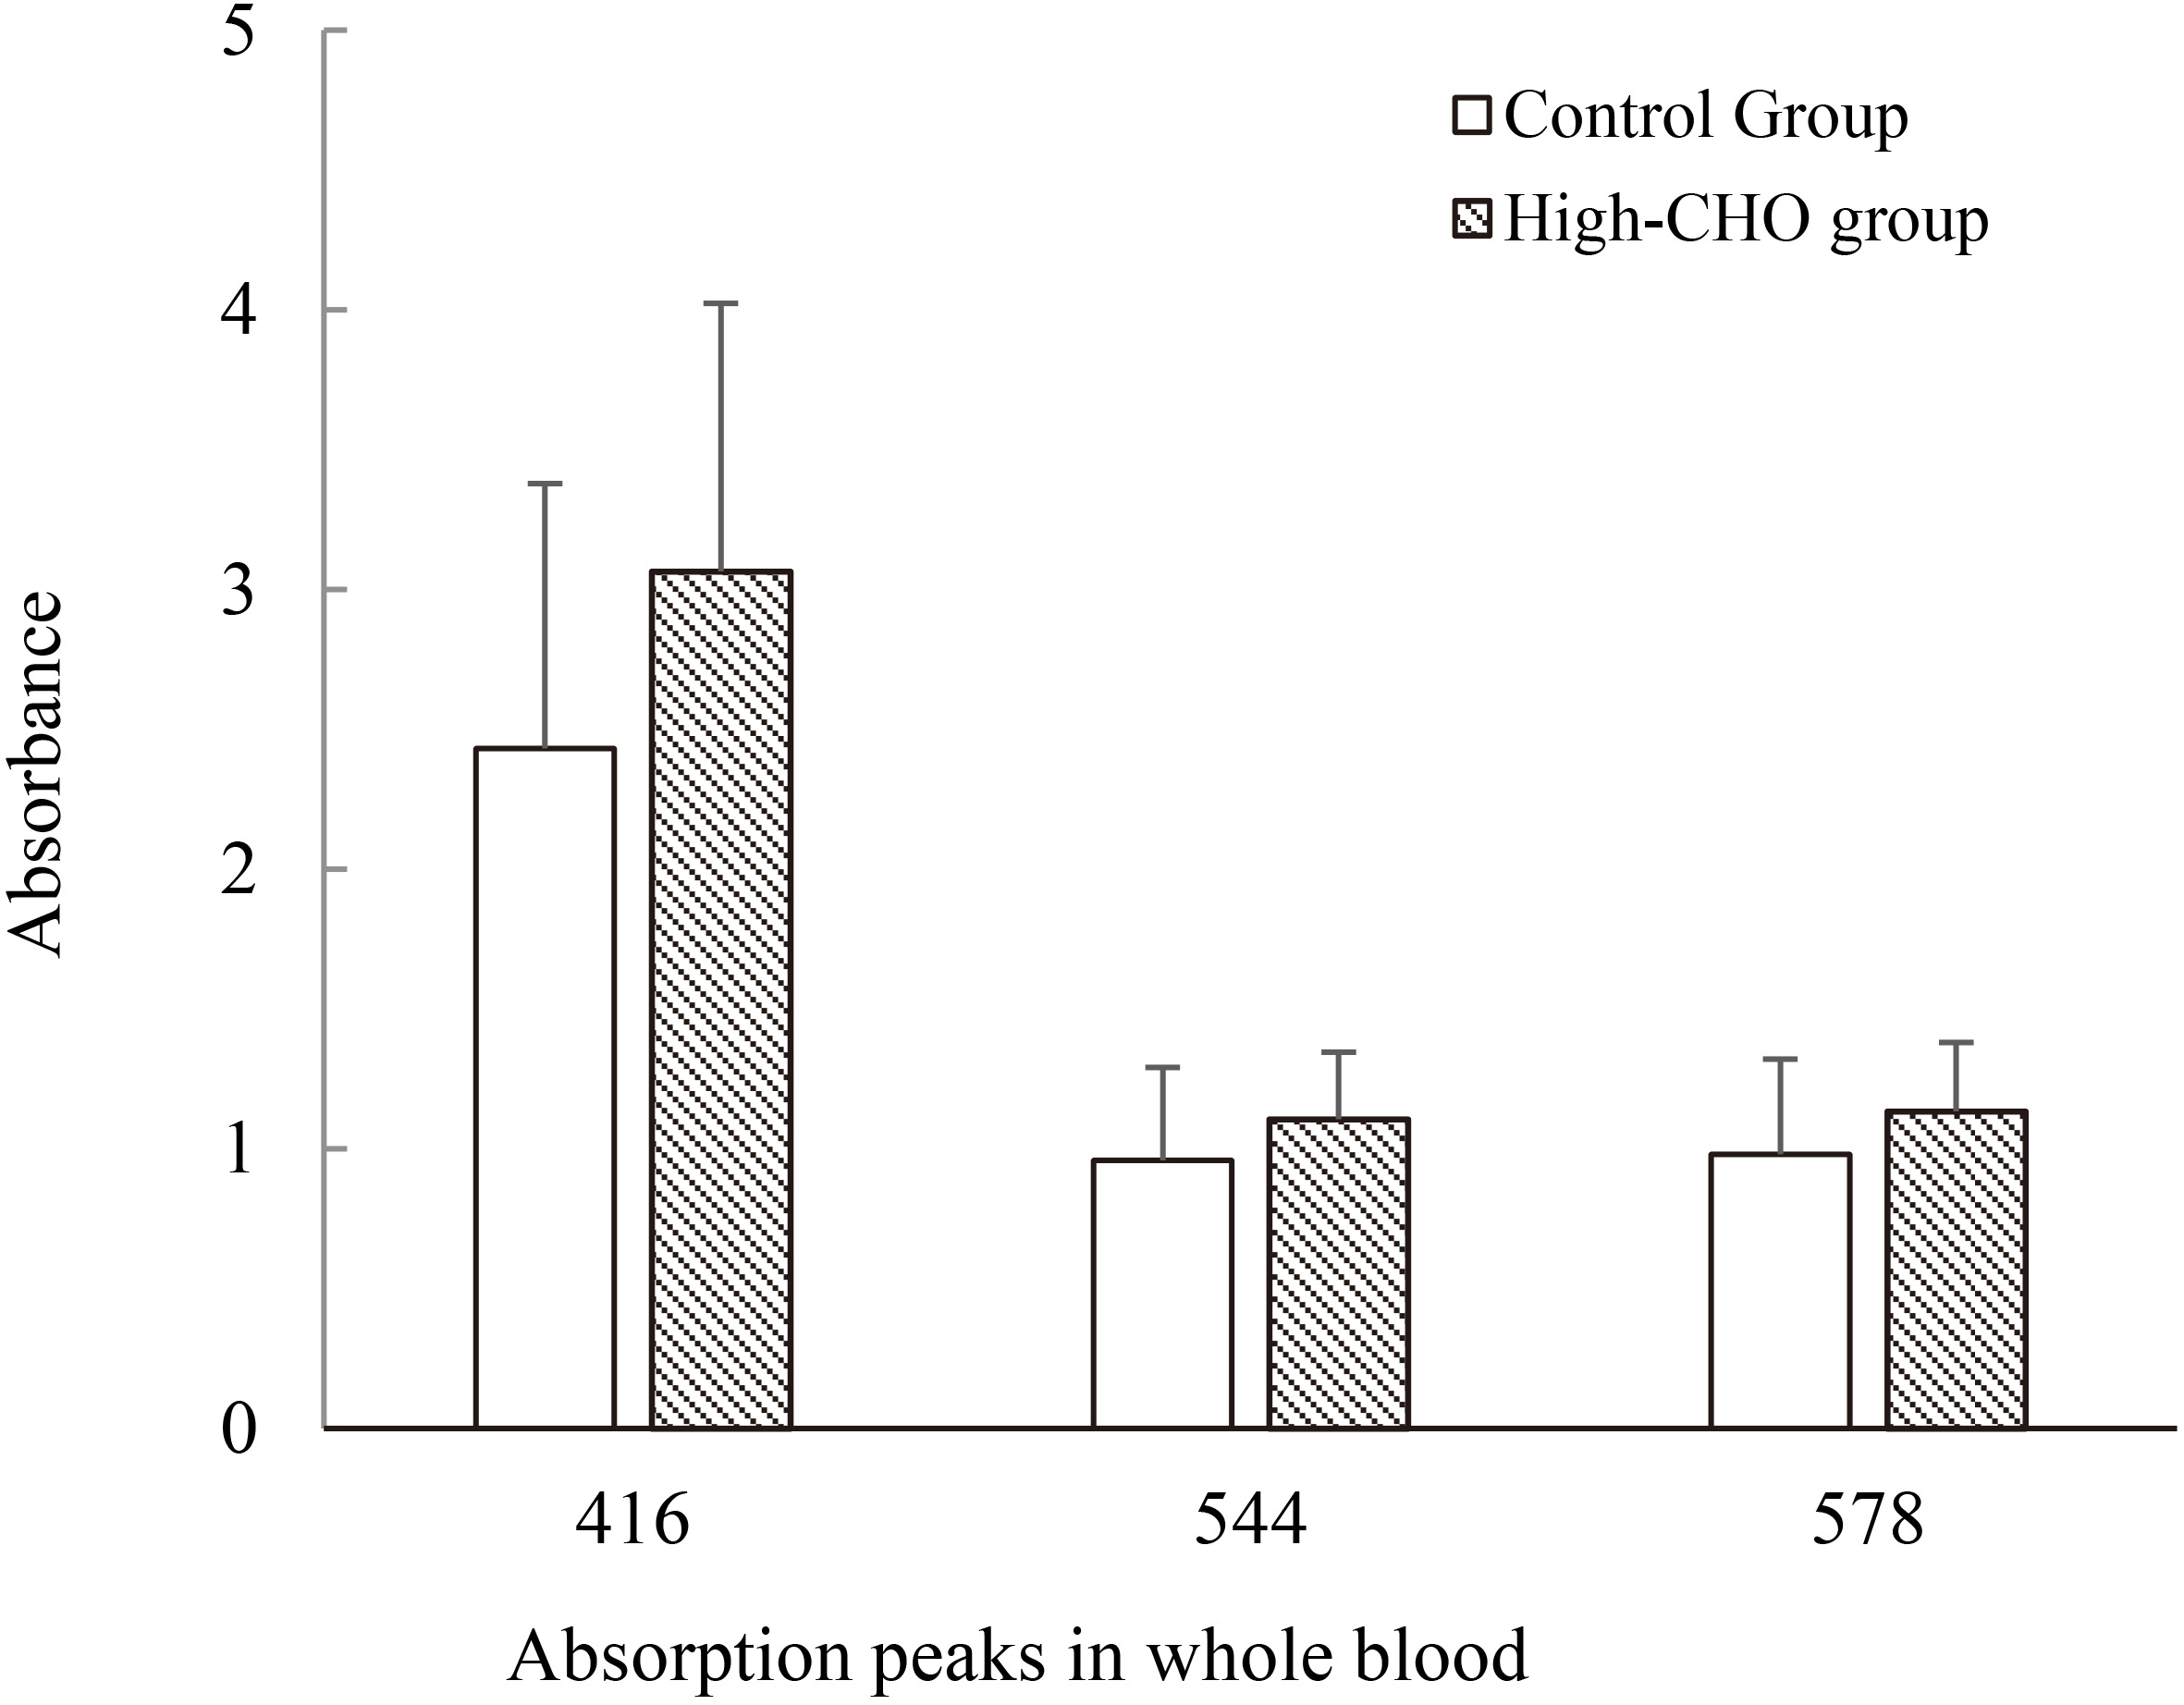 Main absorption peaks (416 nm, 544 nm, 578 nm) from whole blood sample in hyperlipidemia and control groups.